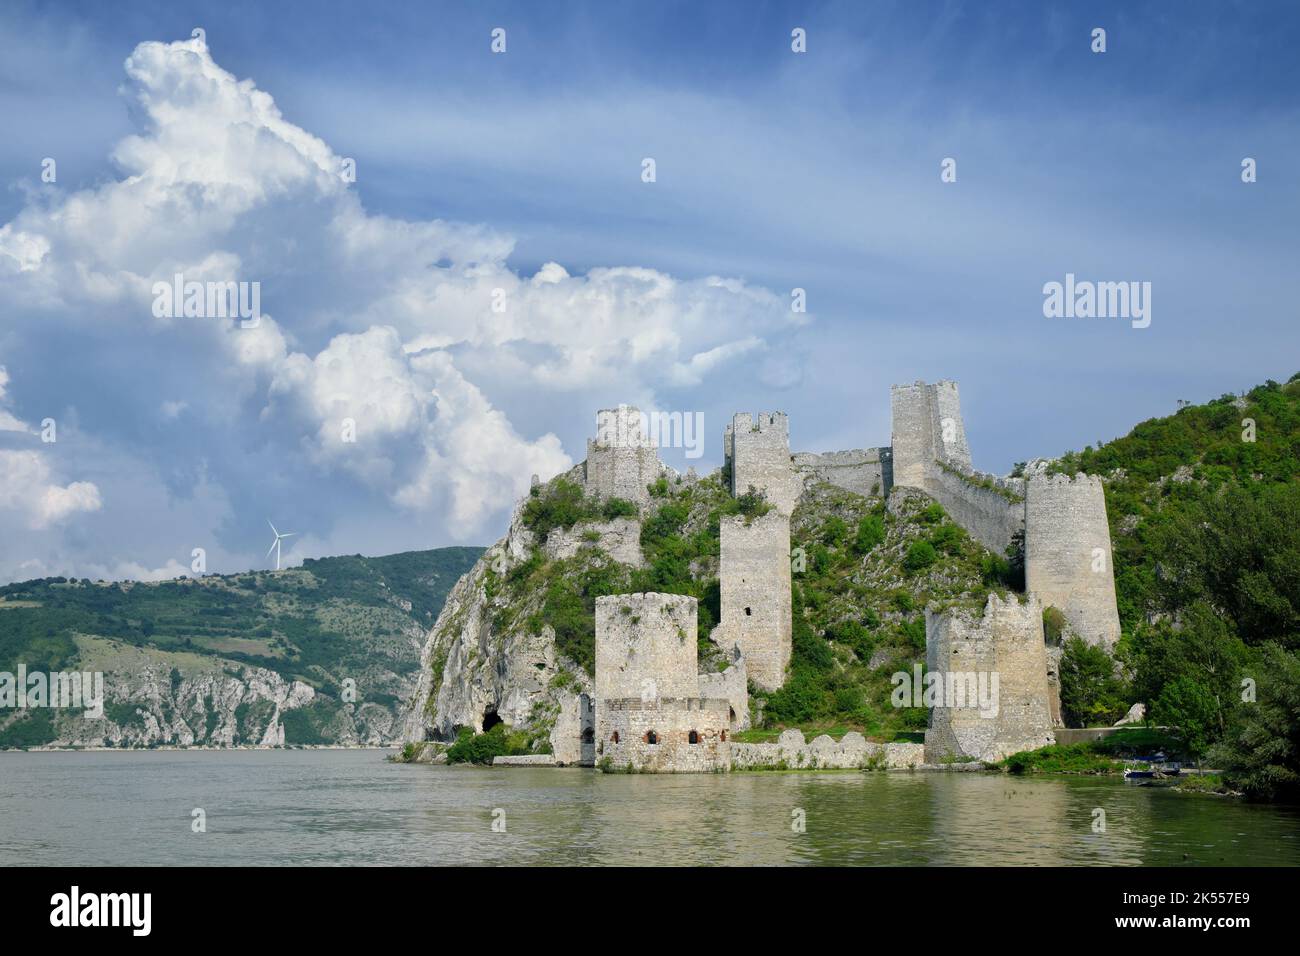 Golubac Fortress on Danube River before reconstruction, Serbia Stock Photo